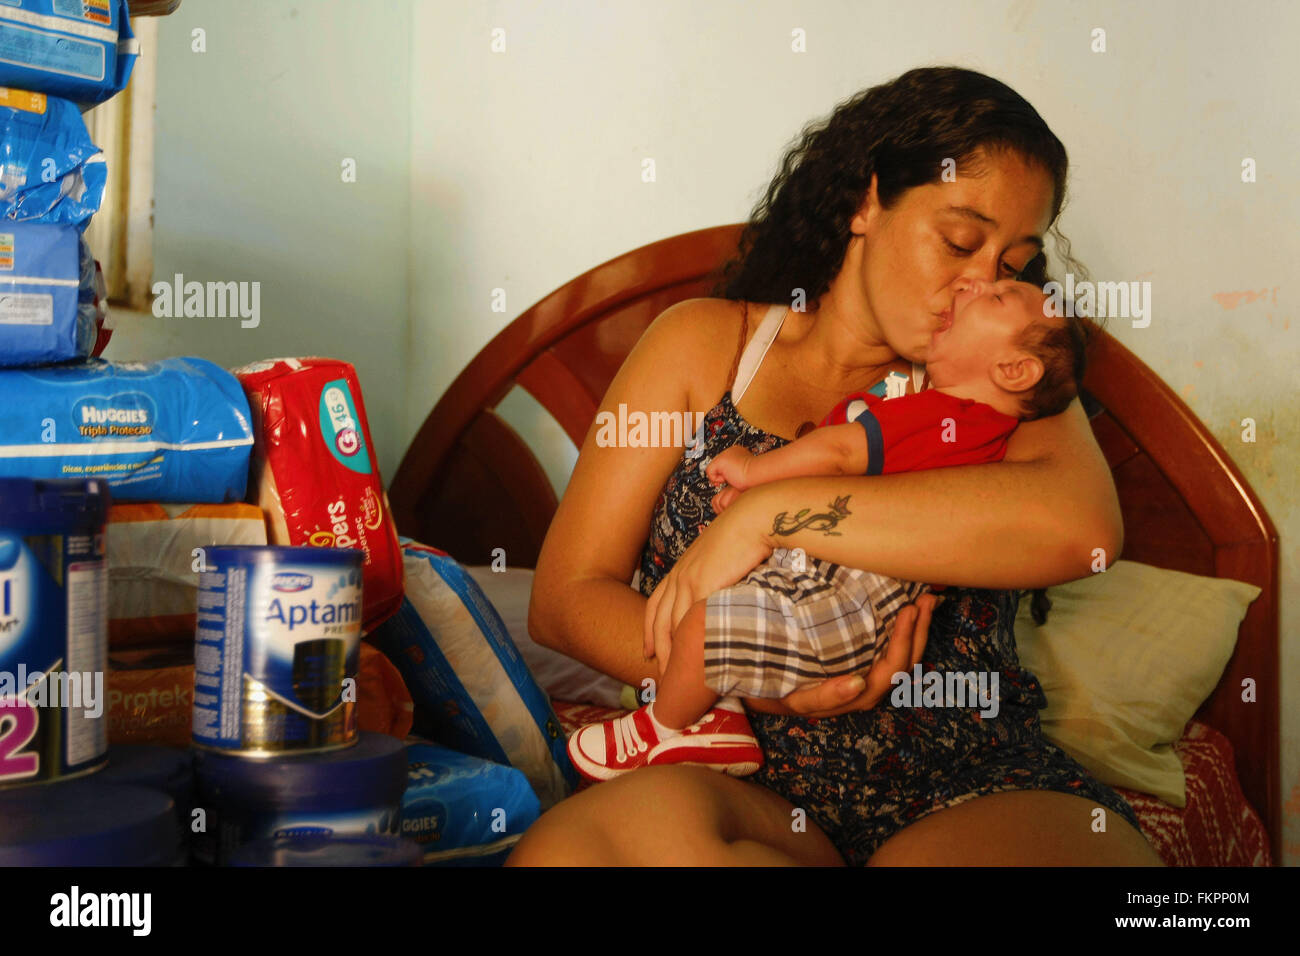 Rio De Janeiro, Brazil. 9th Mar, 2016. Poliana (L) holds her son Luiz Philipe (R), who was born with microcephaly, in their house in Marica, Rio de Janeiro state, Brazil, on March 9, 2016. Brazil will adopt the World Health Organization (WHO) standards from the next week to determine if a baby has microcephaly, the Brazilian Health Ministry said on Wednesday. © Estefan Radovicz/Agencia o Dia/AGENCIA ESTADO/Xinhua/Alamy Live News Stock Photo